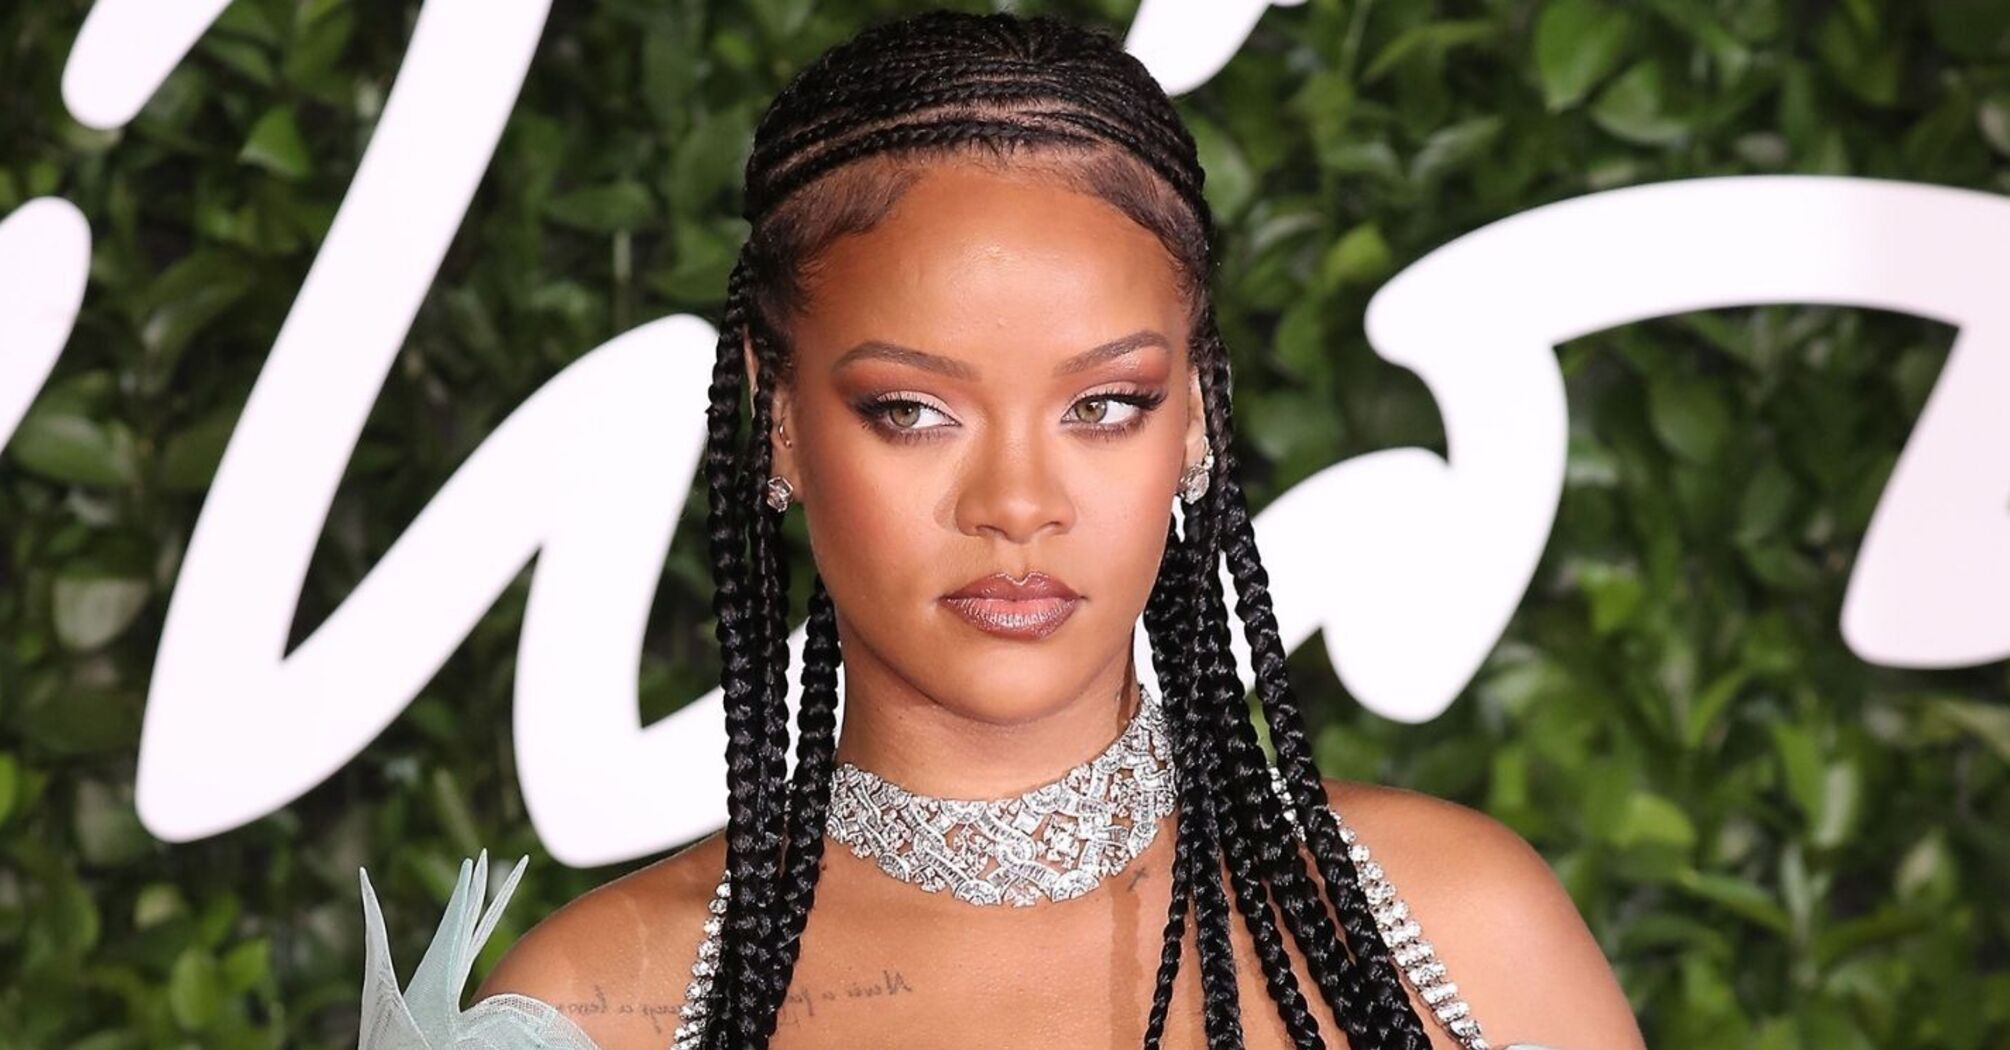 10 Exclusive Facts About Rihanna